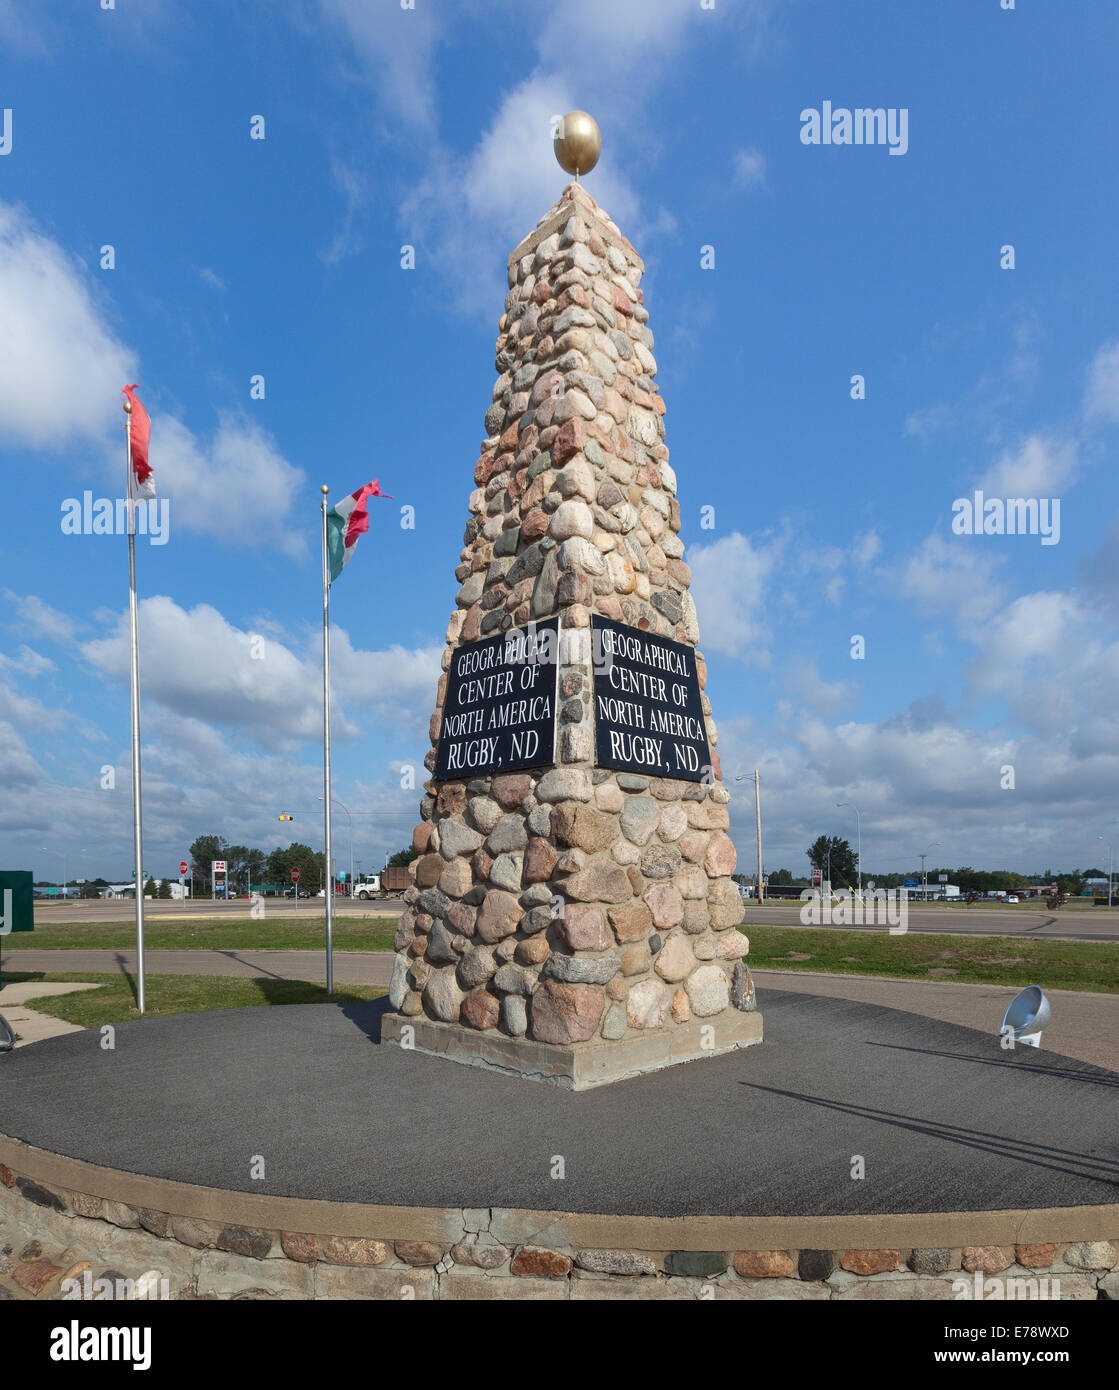 The Geographical Center of North America Monument in Rugby, North Dakota Stock Photo